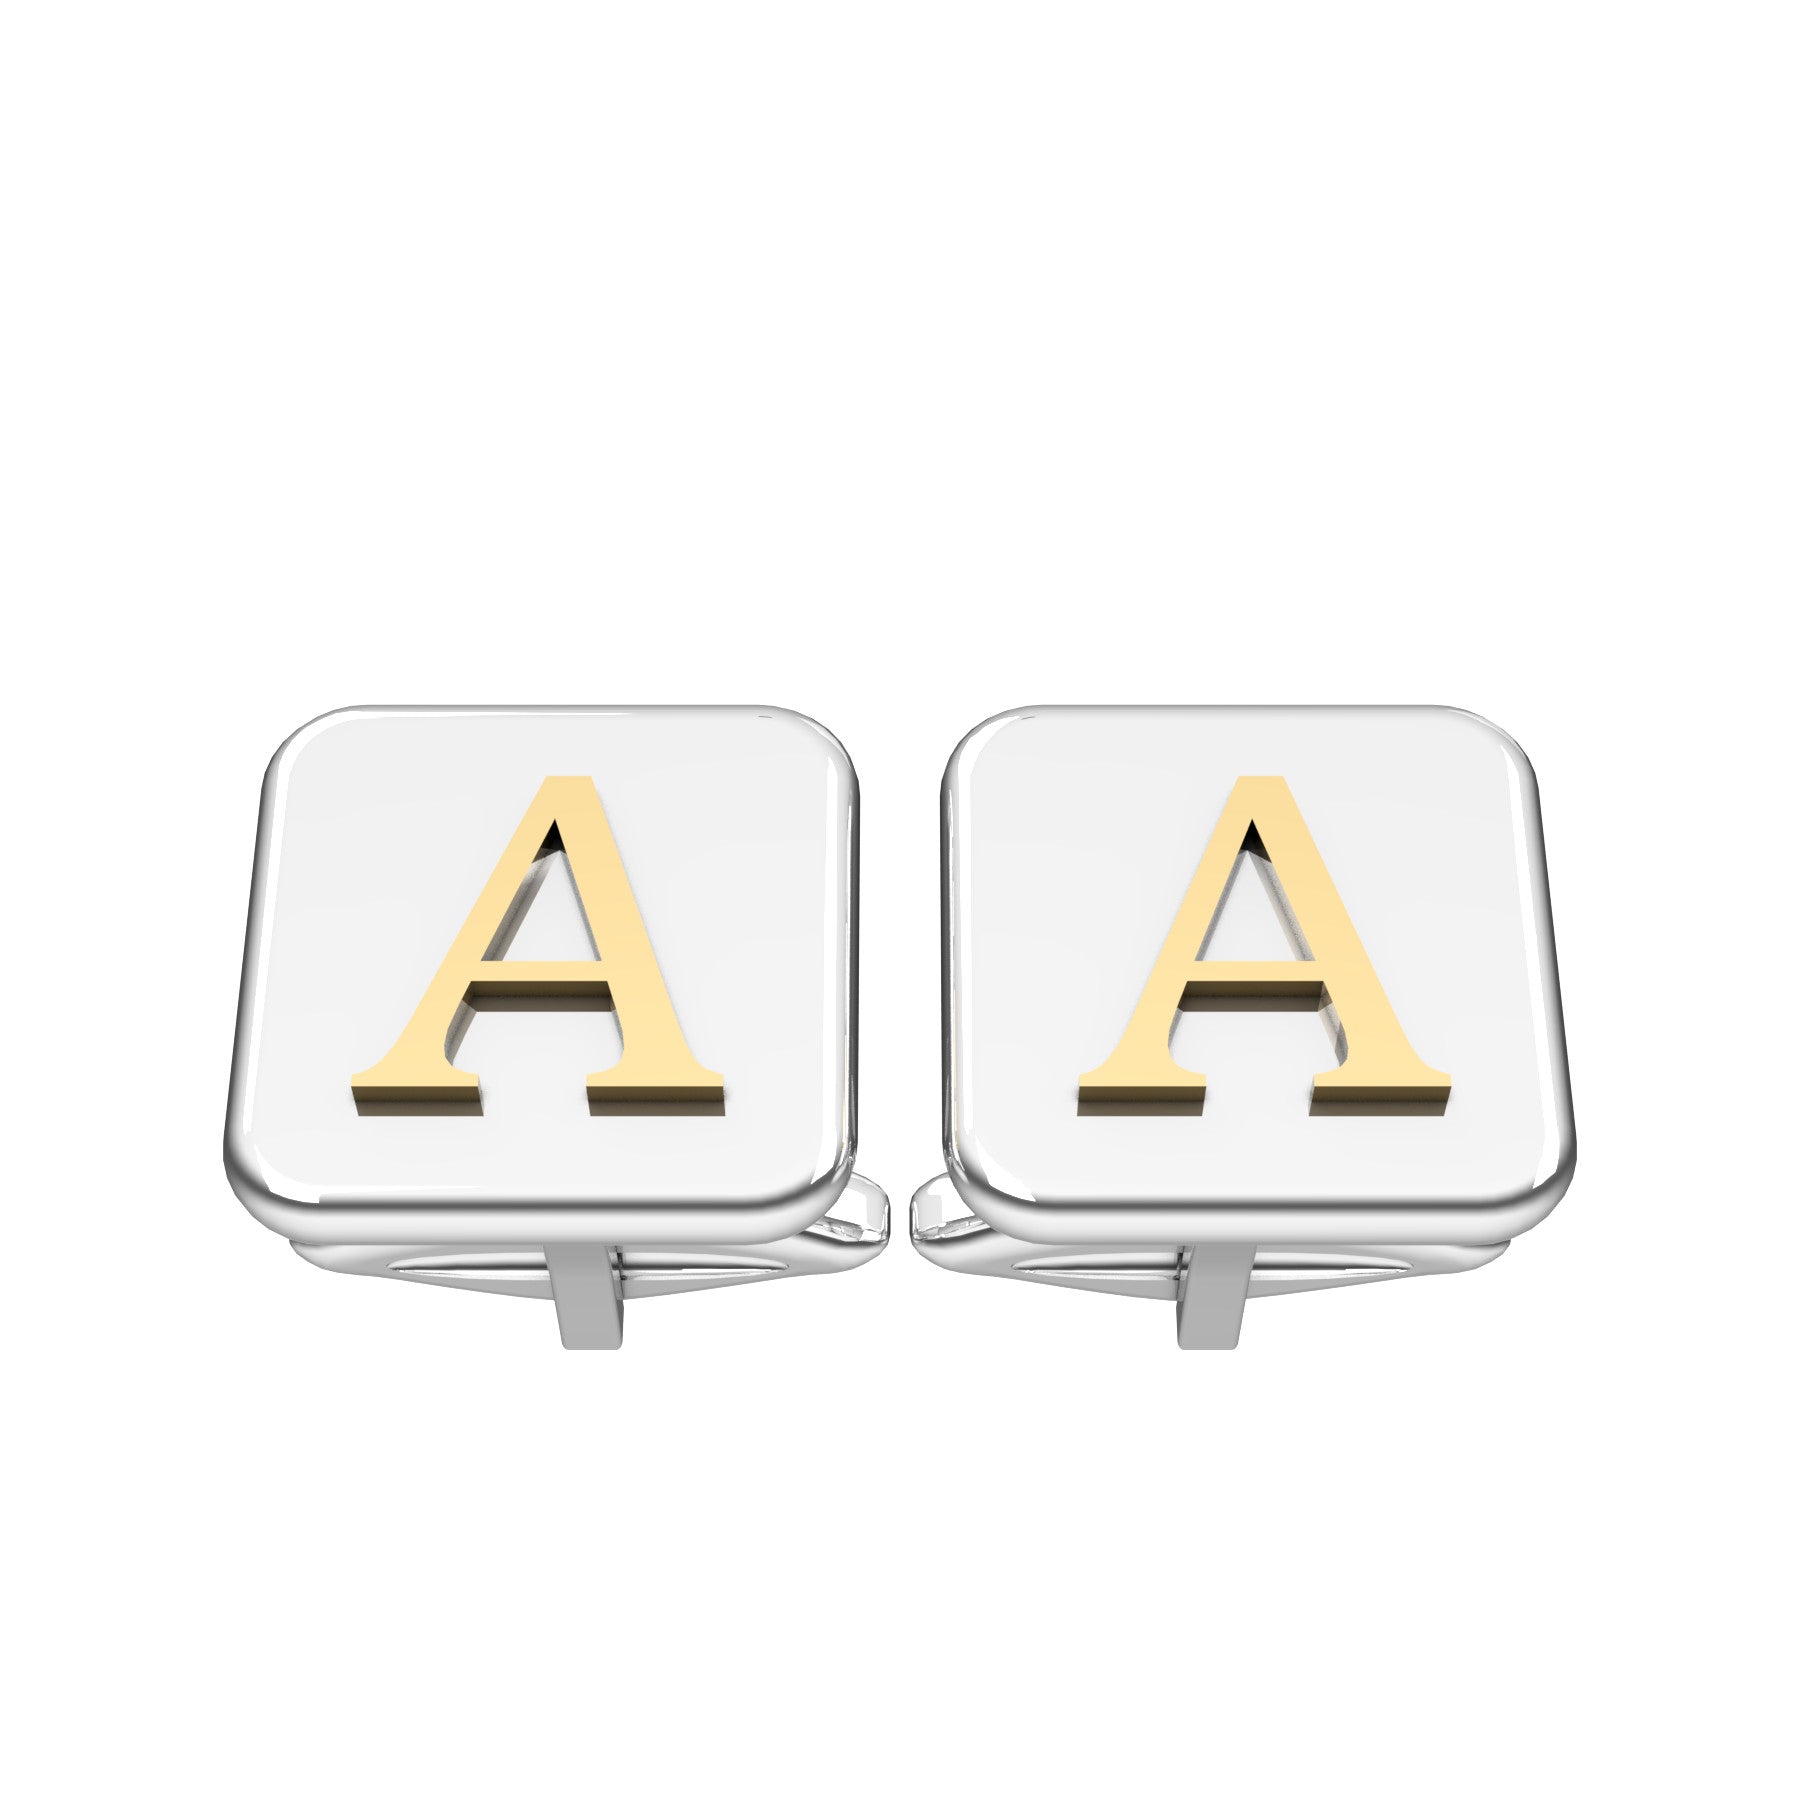 rounded square cufflinks, 18 K white and yellow gold, weight about 16,1 g (0.57 oz) size 15x15x3 mm max